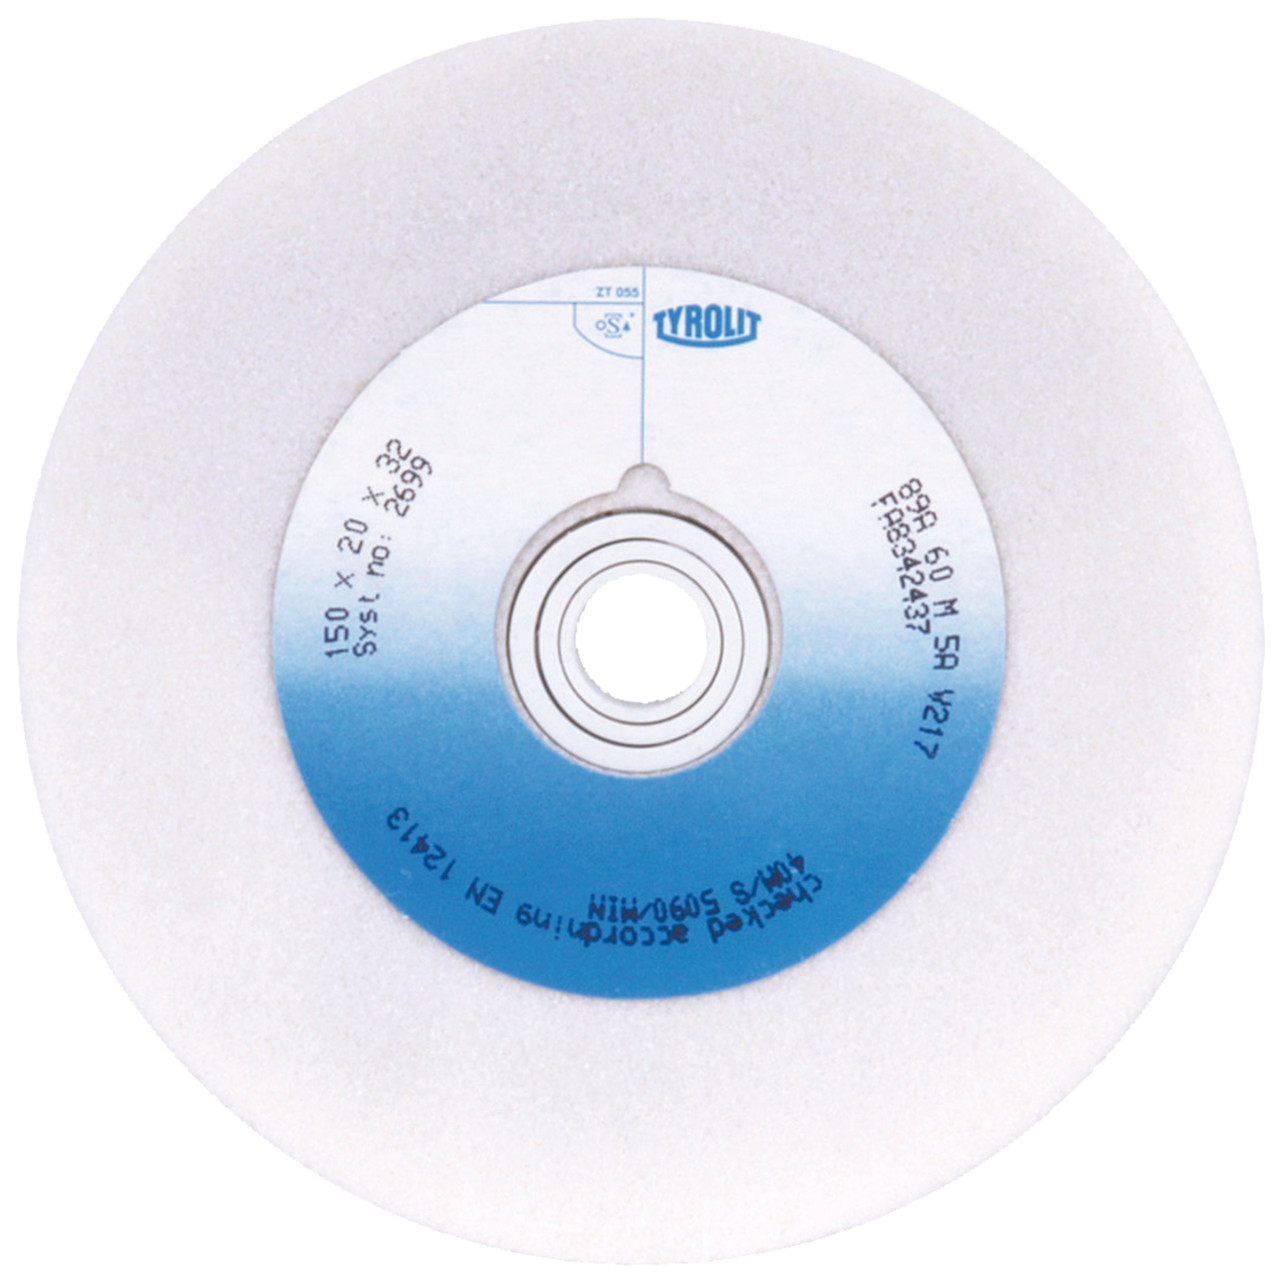 TYROLIT conventional ceramic grinding wheels DxDxH 175x32x32 For high-alloy steels and HSS, shape: 1, Art. 918448